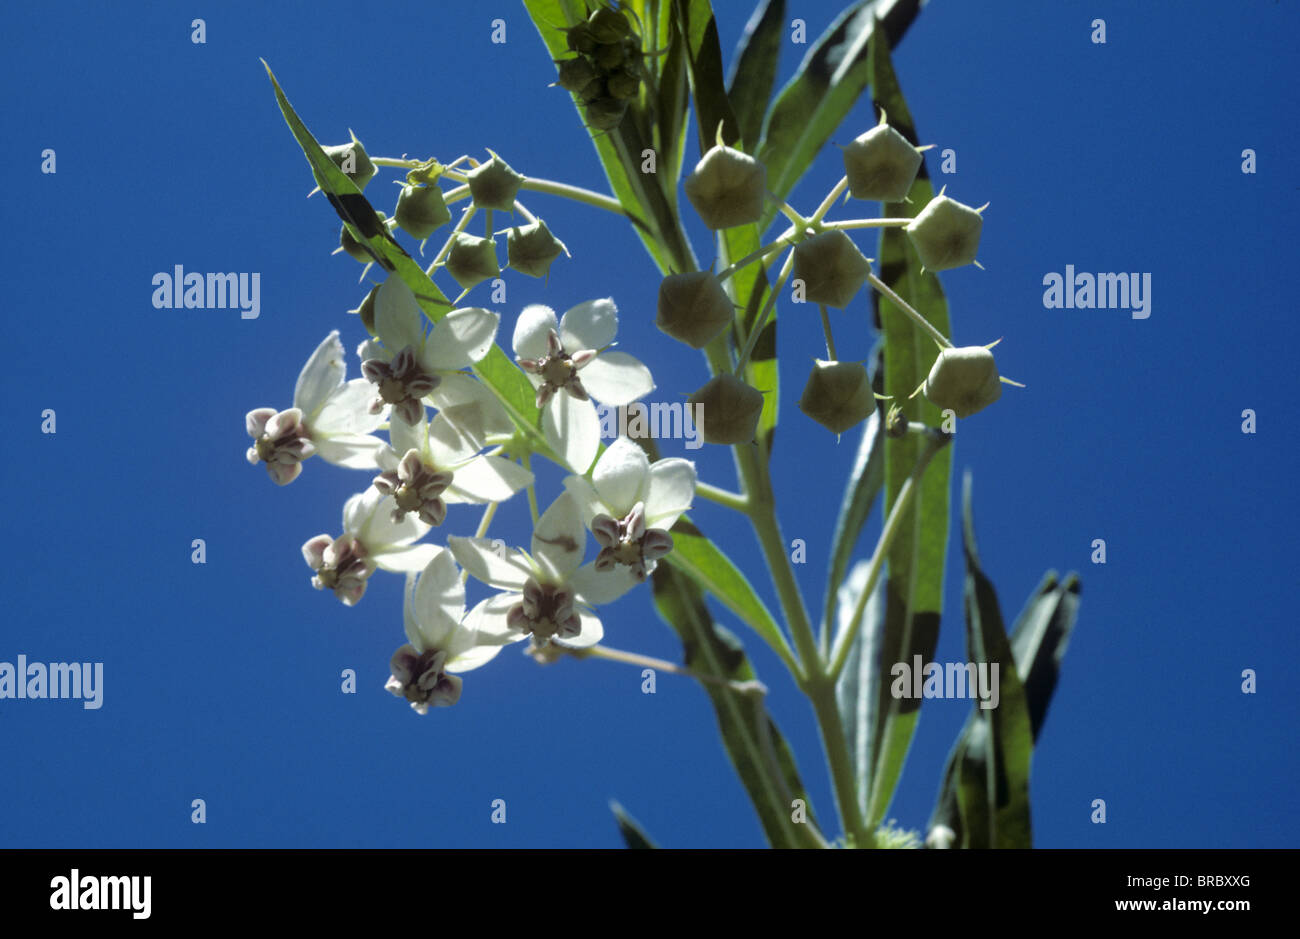 Balloonplant, balloon cotton-bush or swan plant (Asclepias physocarpa) flowering plant, South Africa Stock Photo